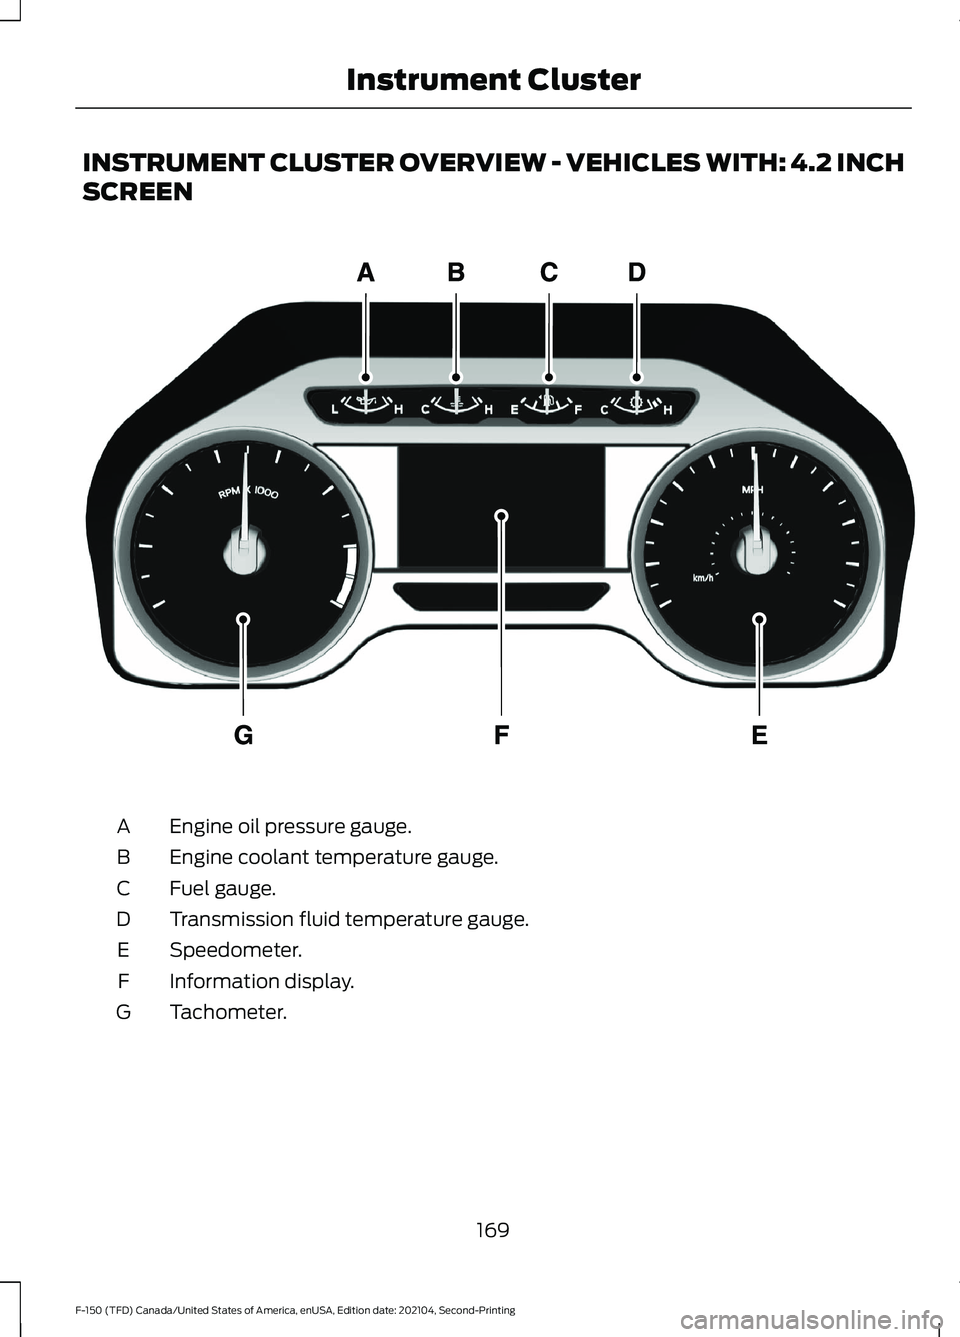 FORD F-150 2021  Owners Manual INSTRUMENT CLUSTER OVERVIEW - VEHICLES WITH: 4.2 INCH
SCREEN
Engine oil pressure gauge.
A
Engine coolant temperature gauge.
B
Fuel gauge.
C
Transmission fluid temperature gauge.
D
Speedometer.
E
Infor